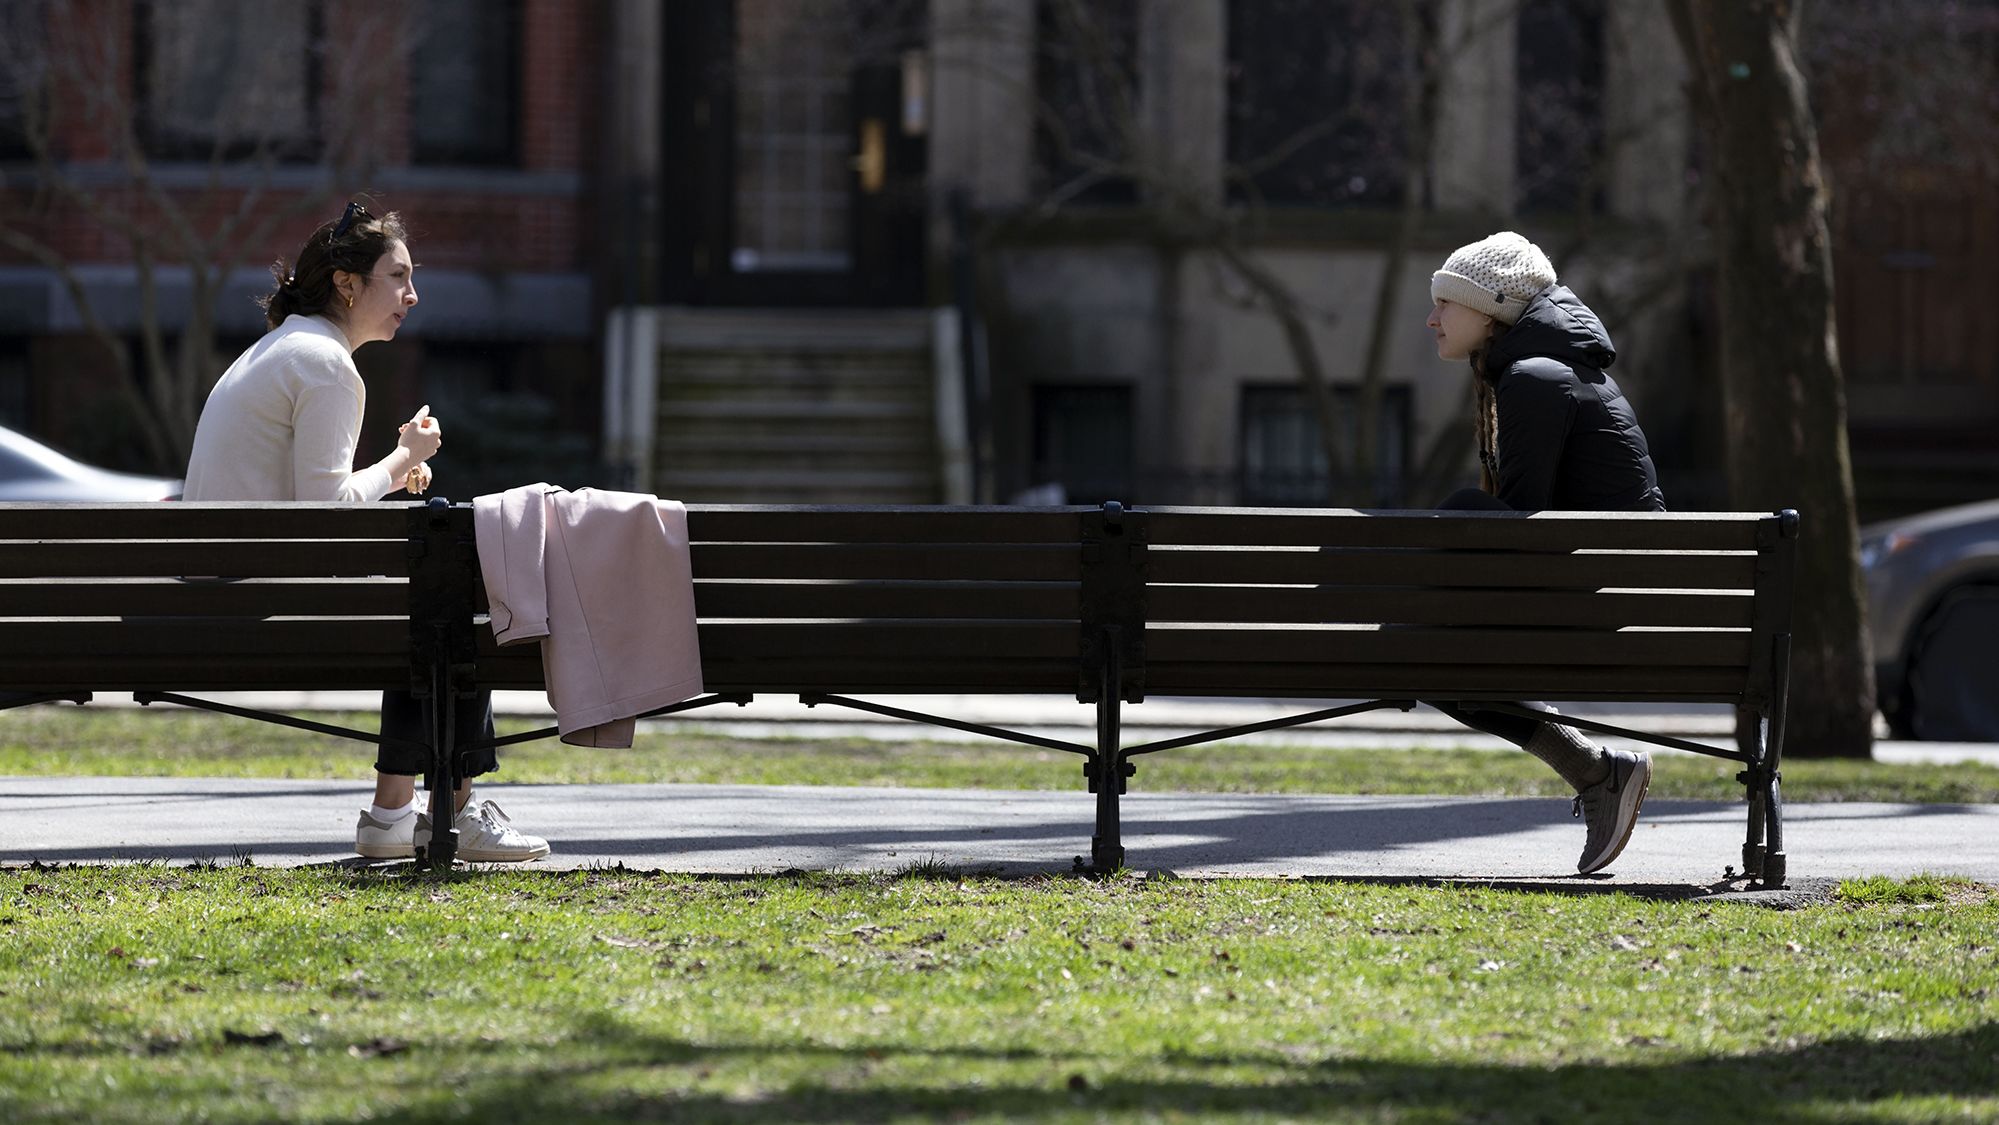 Two women practice social distancing while talking on Commonwealth Avenue Mall, April 4, in Boston. The term "social distancing" has become a commonly used term this year amid the Covid-19 pandemic.